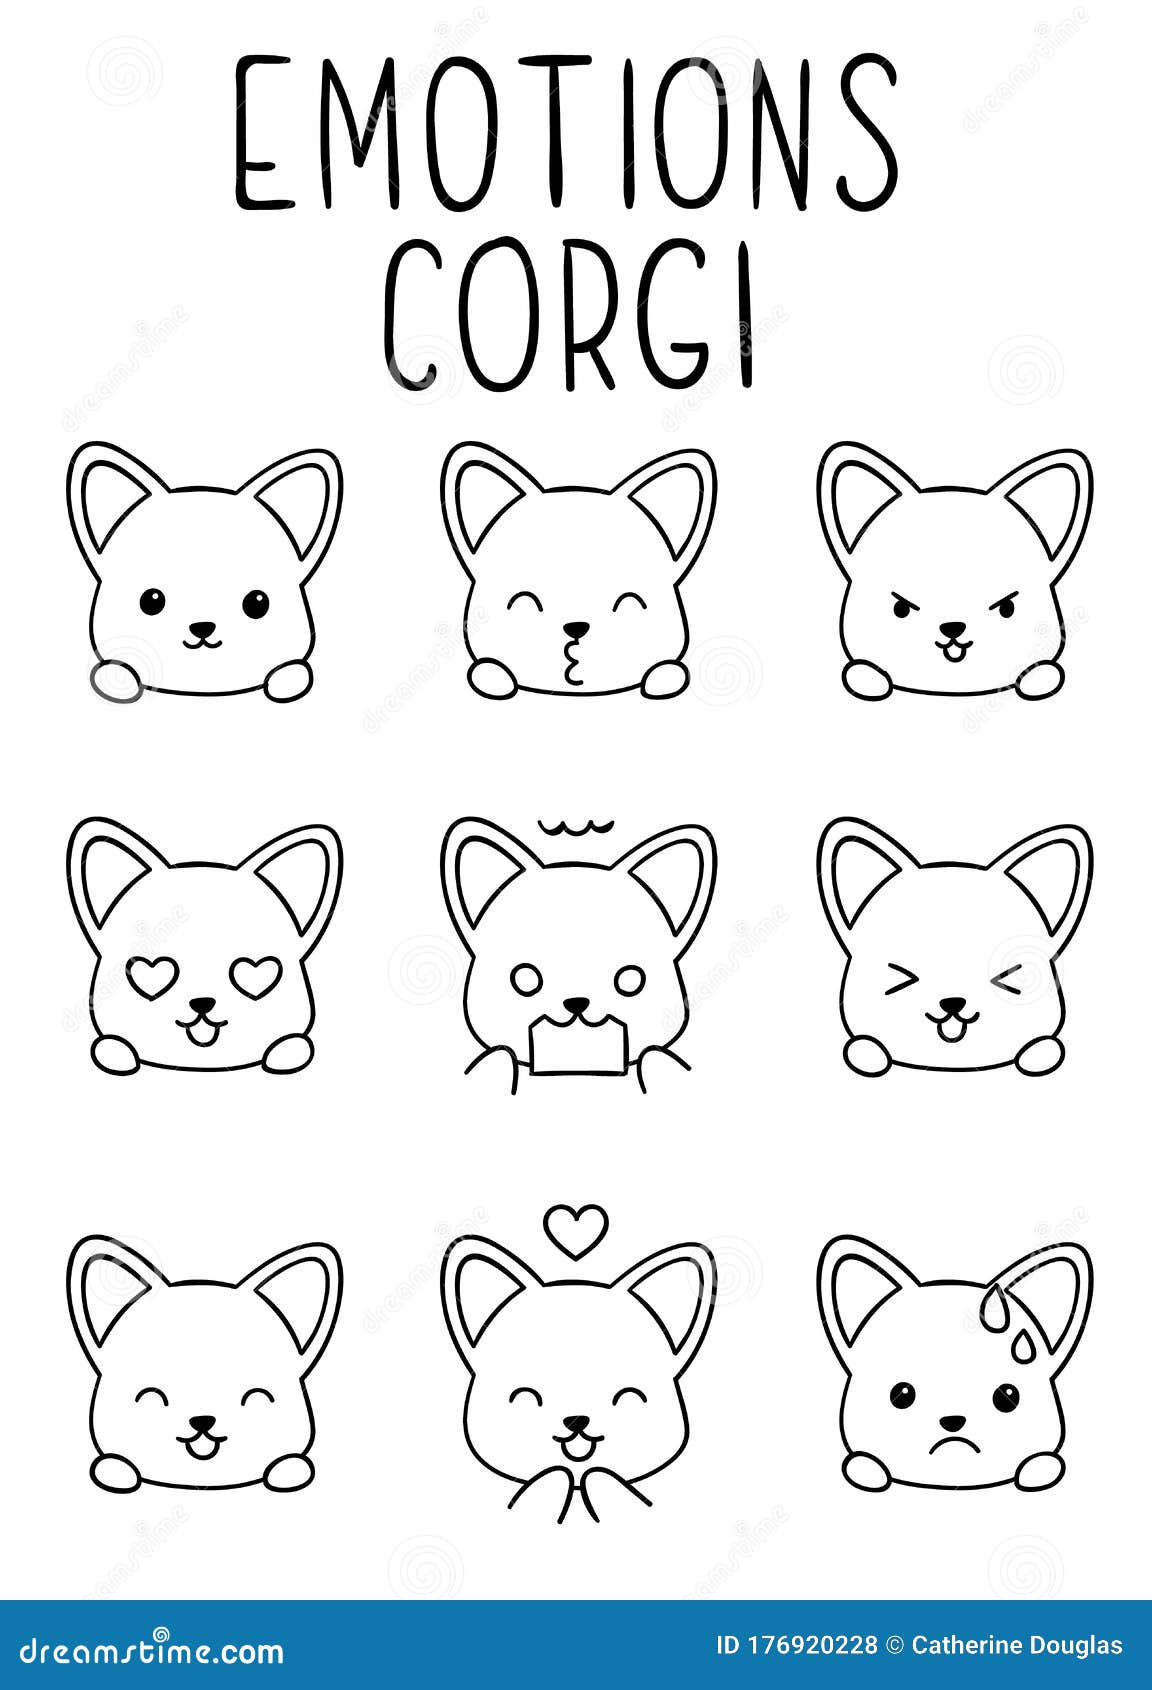 Coloring Pages Black And White Cute Kawaii Hand Drawn Emotions Corgi Dog Doodles Stock Vector Illustration Of Puppy Doodle 176920228